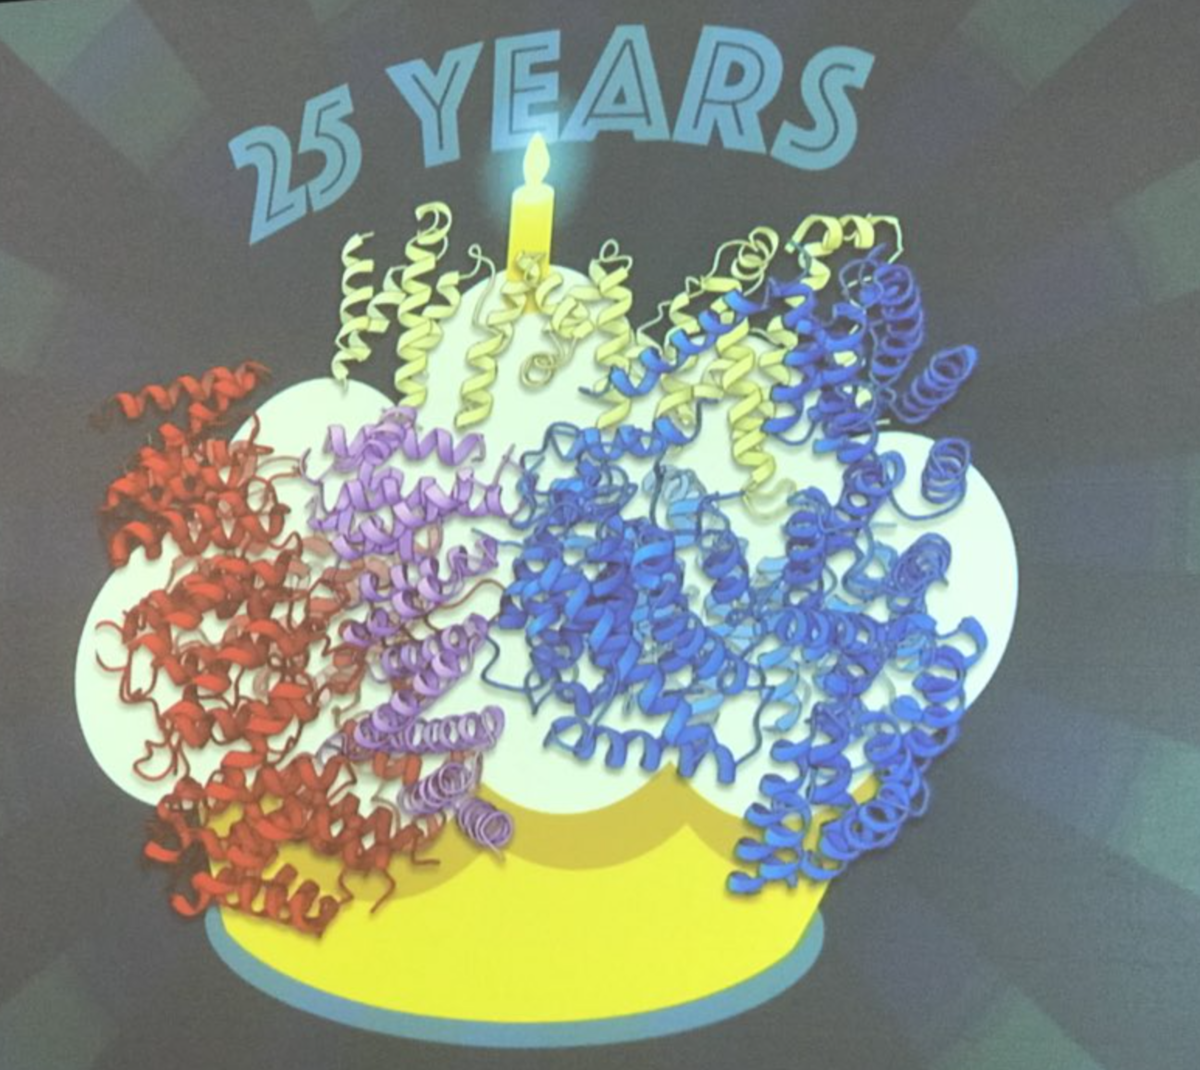 Dr Kochanek unveiled the structure of huntingtin (the squiggly ribbons) in February at the therapeutics conference, as a birthday present to the HD community celebrating 25 years since the discovery of the gene.  